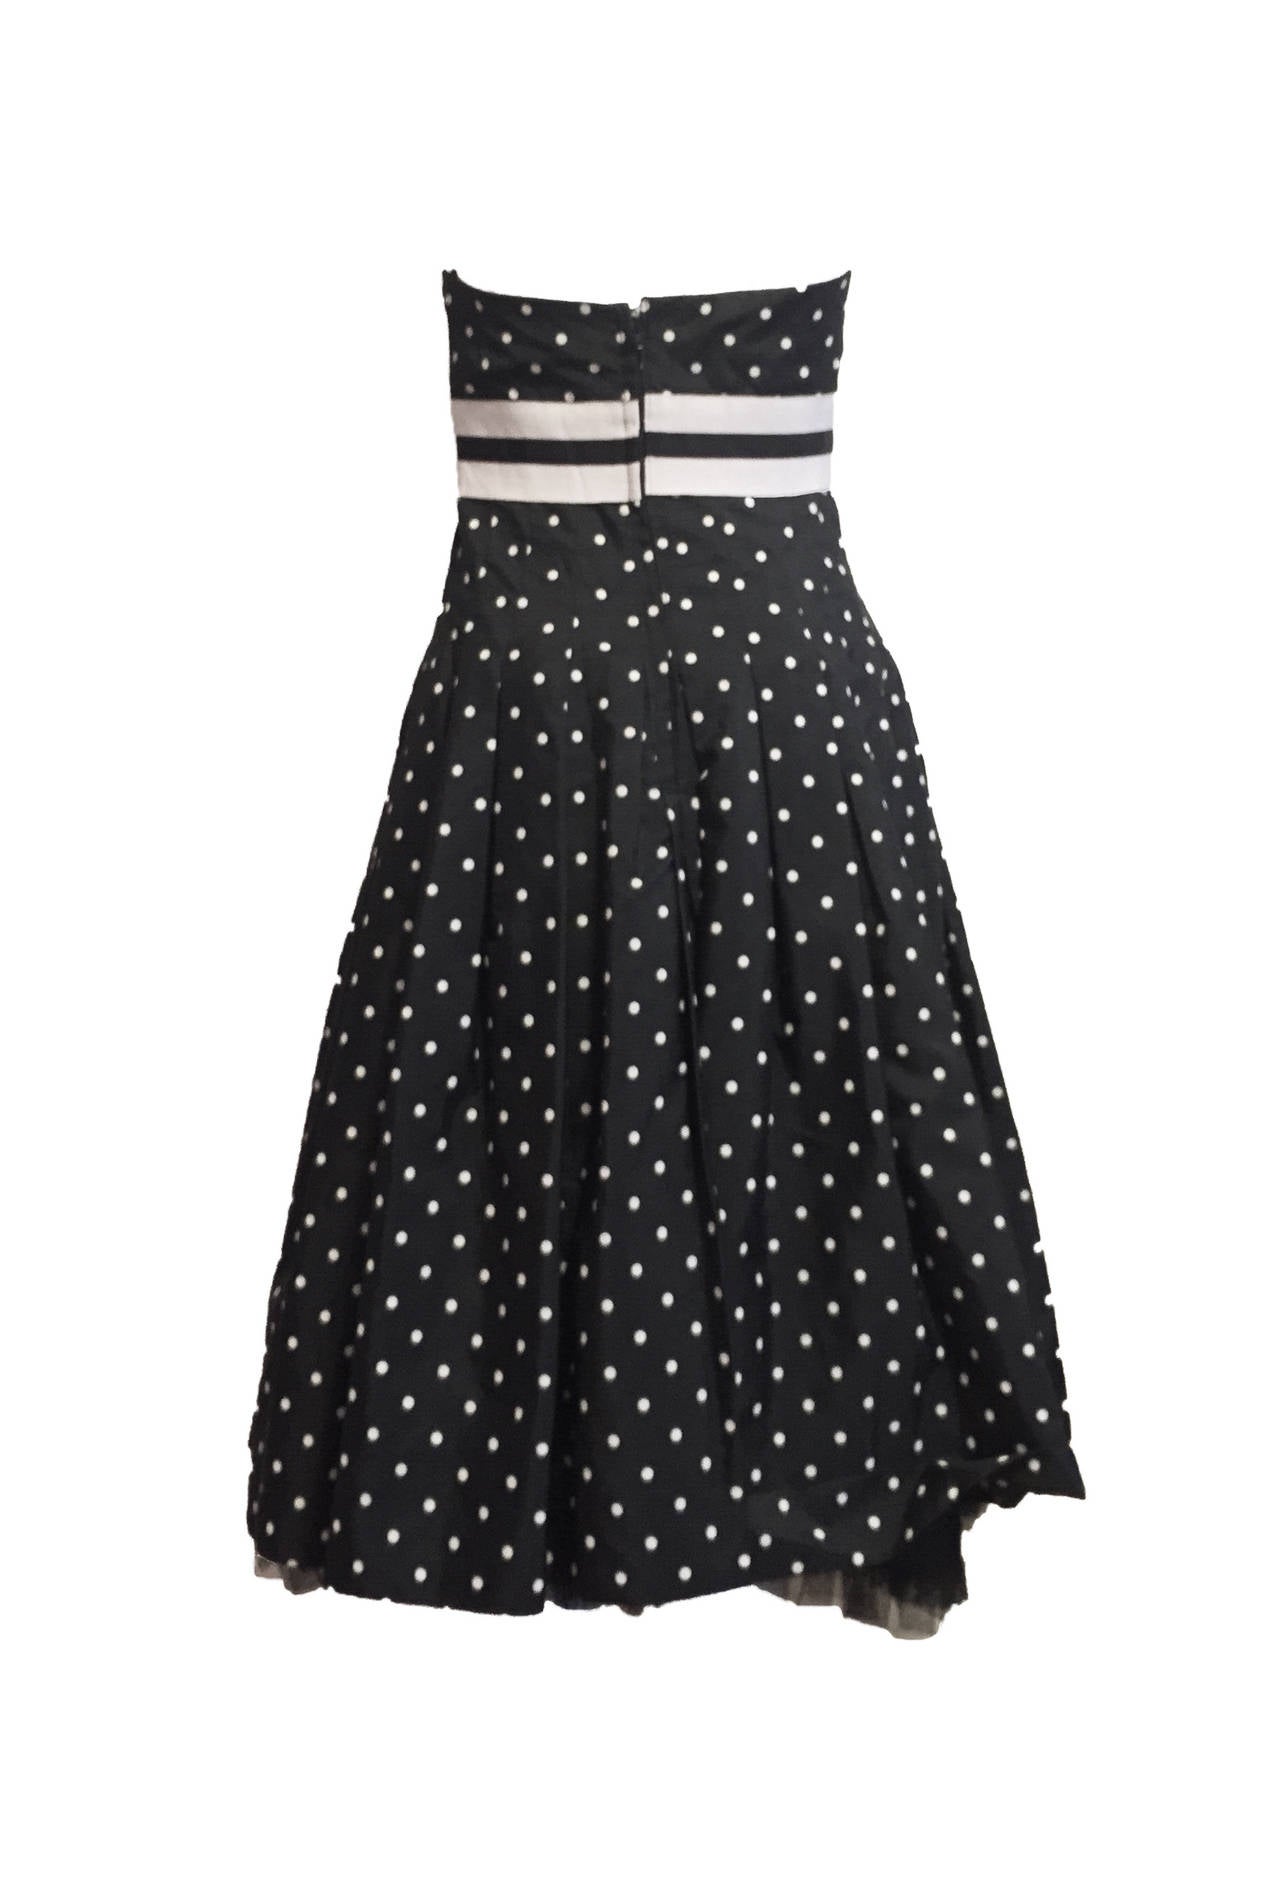 Victor Costa Famous Black & White Dot Dress For Sale 1